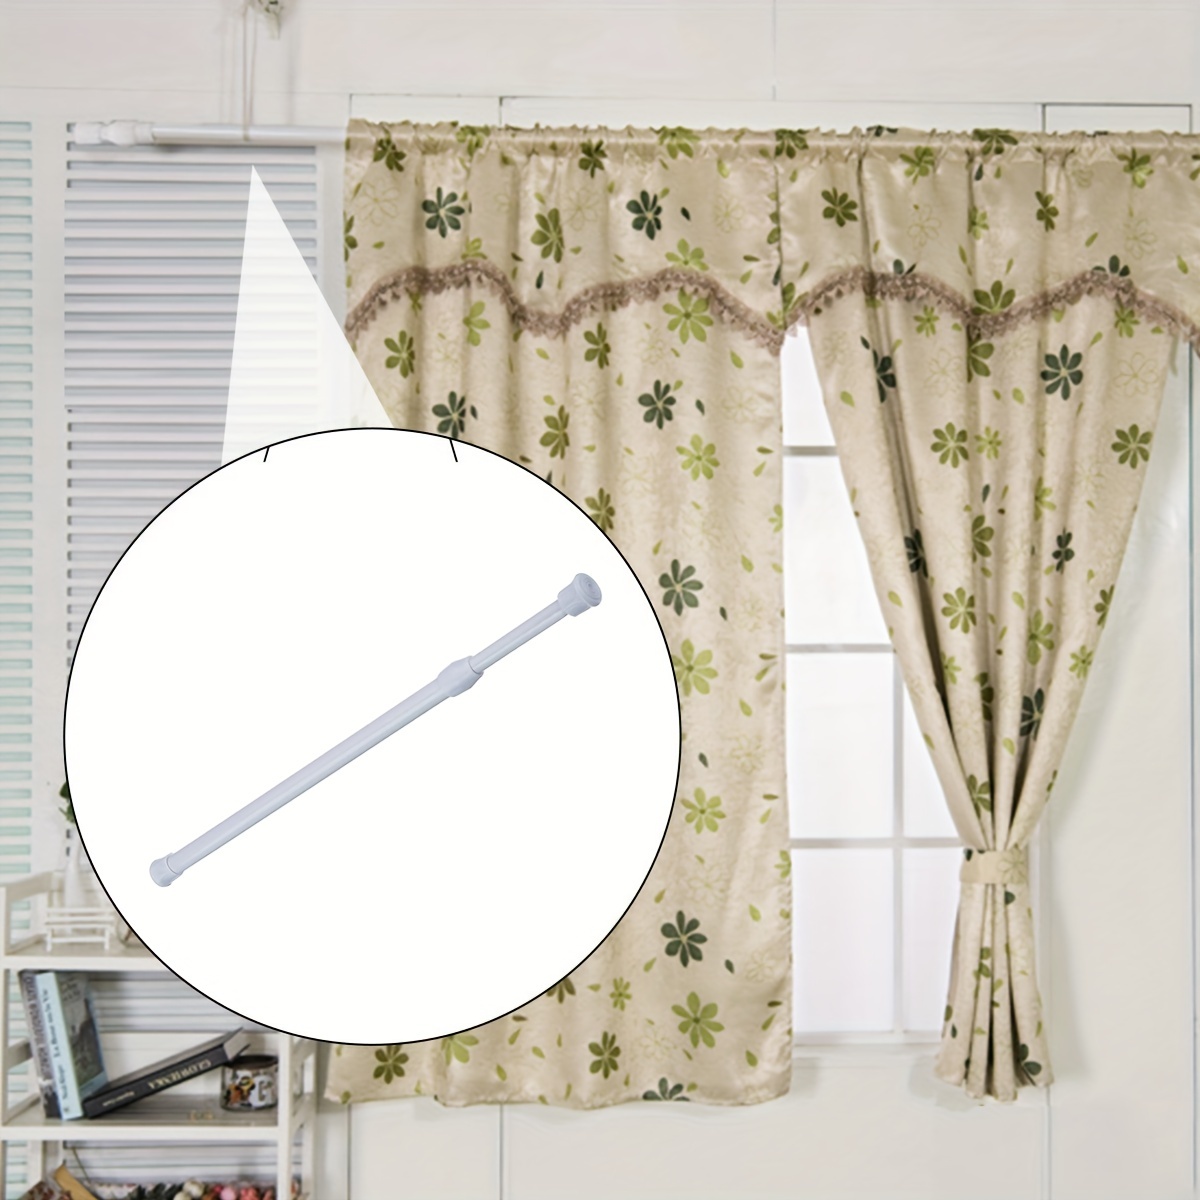 

Adjustable Curtain Rod With Metal Spring: Bathroom Rod, Shower Rod, Extendable Ergonomic Track, Clothes Rod - 55-90cm/21.65-35.43in